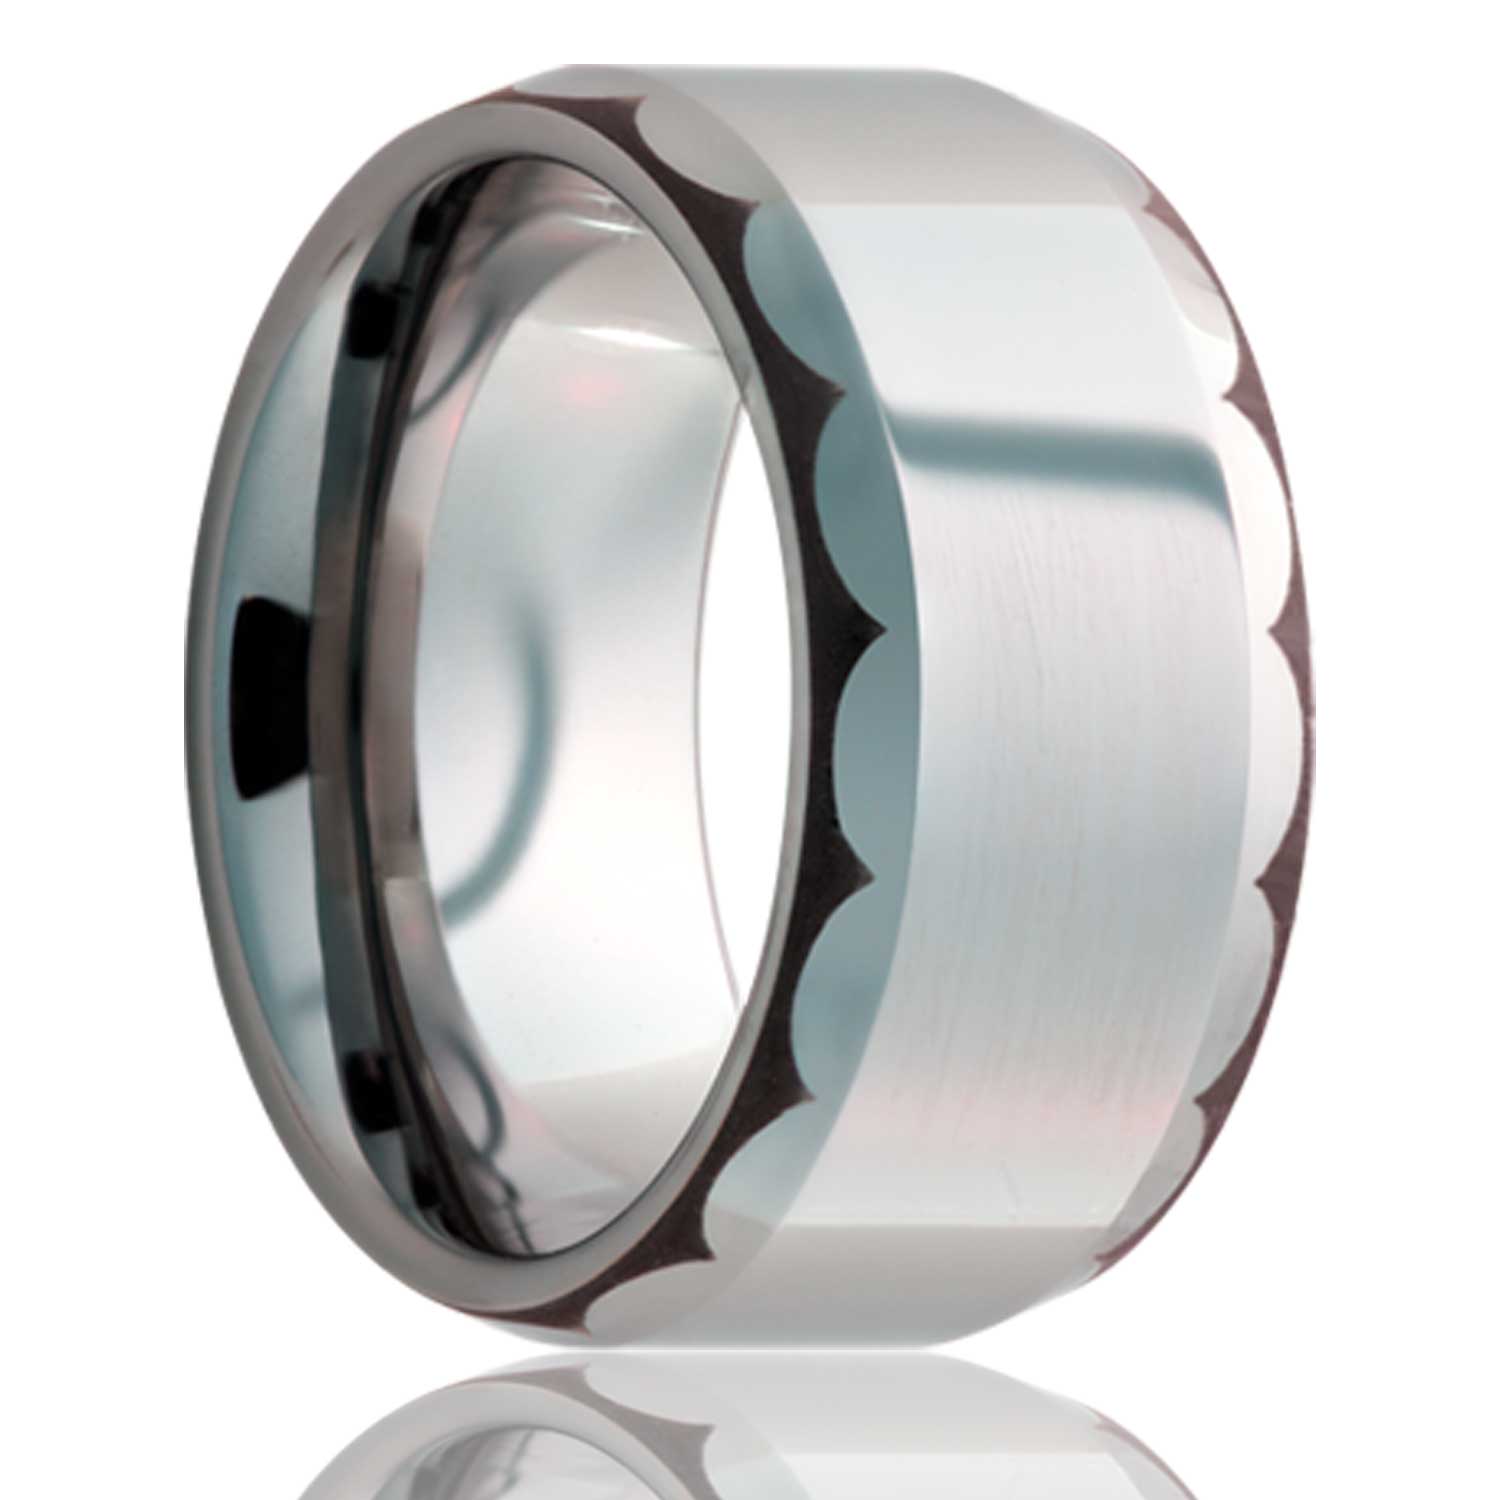 A titanium wedding band with scalloped pattern beveled edges displayed on a neutral white background.